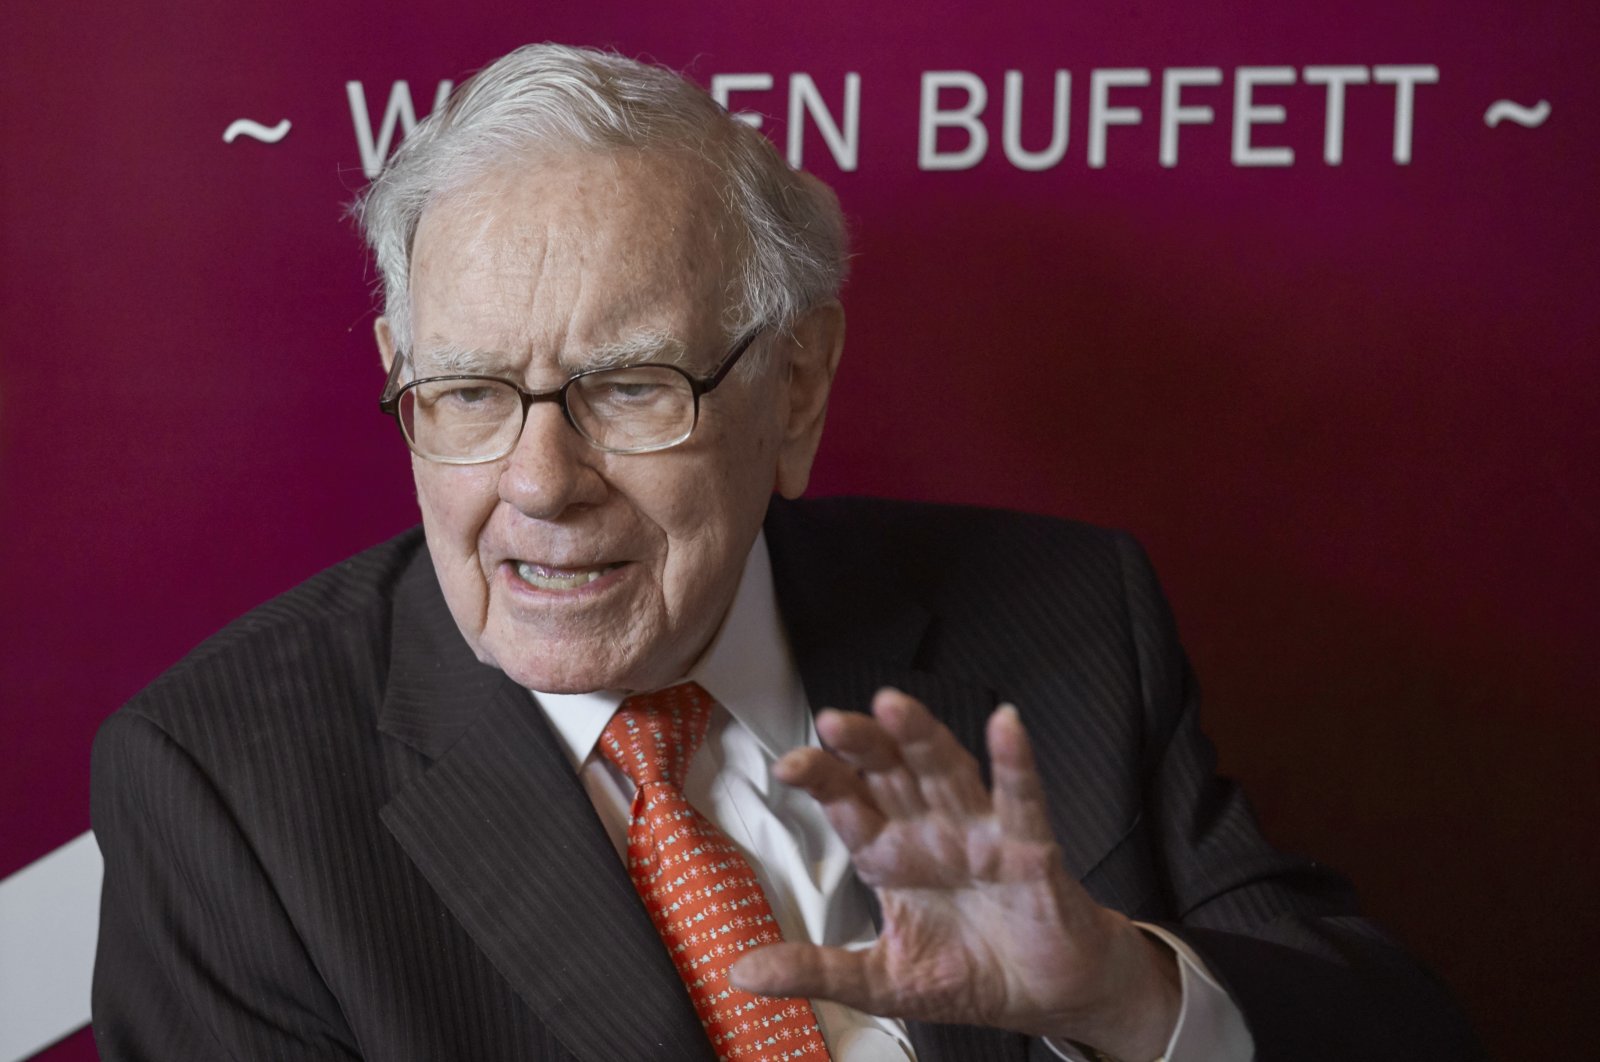 In this May 5, 2019, file photo Warren Buffett, chair and CEO of Berkshire Hathaway, speaks during a game of bridge following the annual Berkshire Hathaway shareholders meeting in Omaha, Nebraska. (AP File Photo)